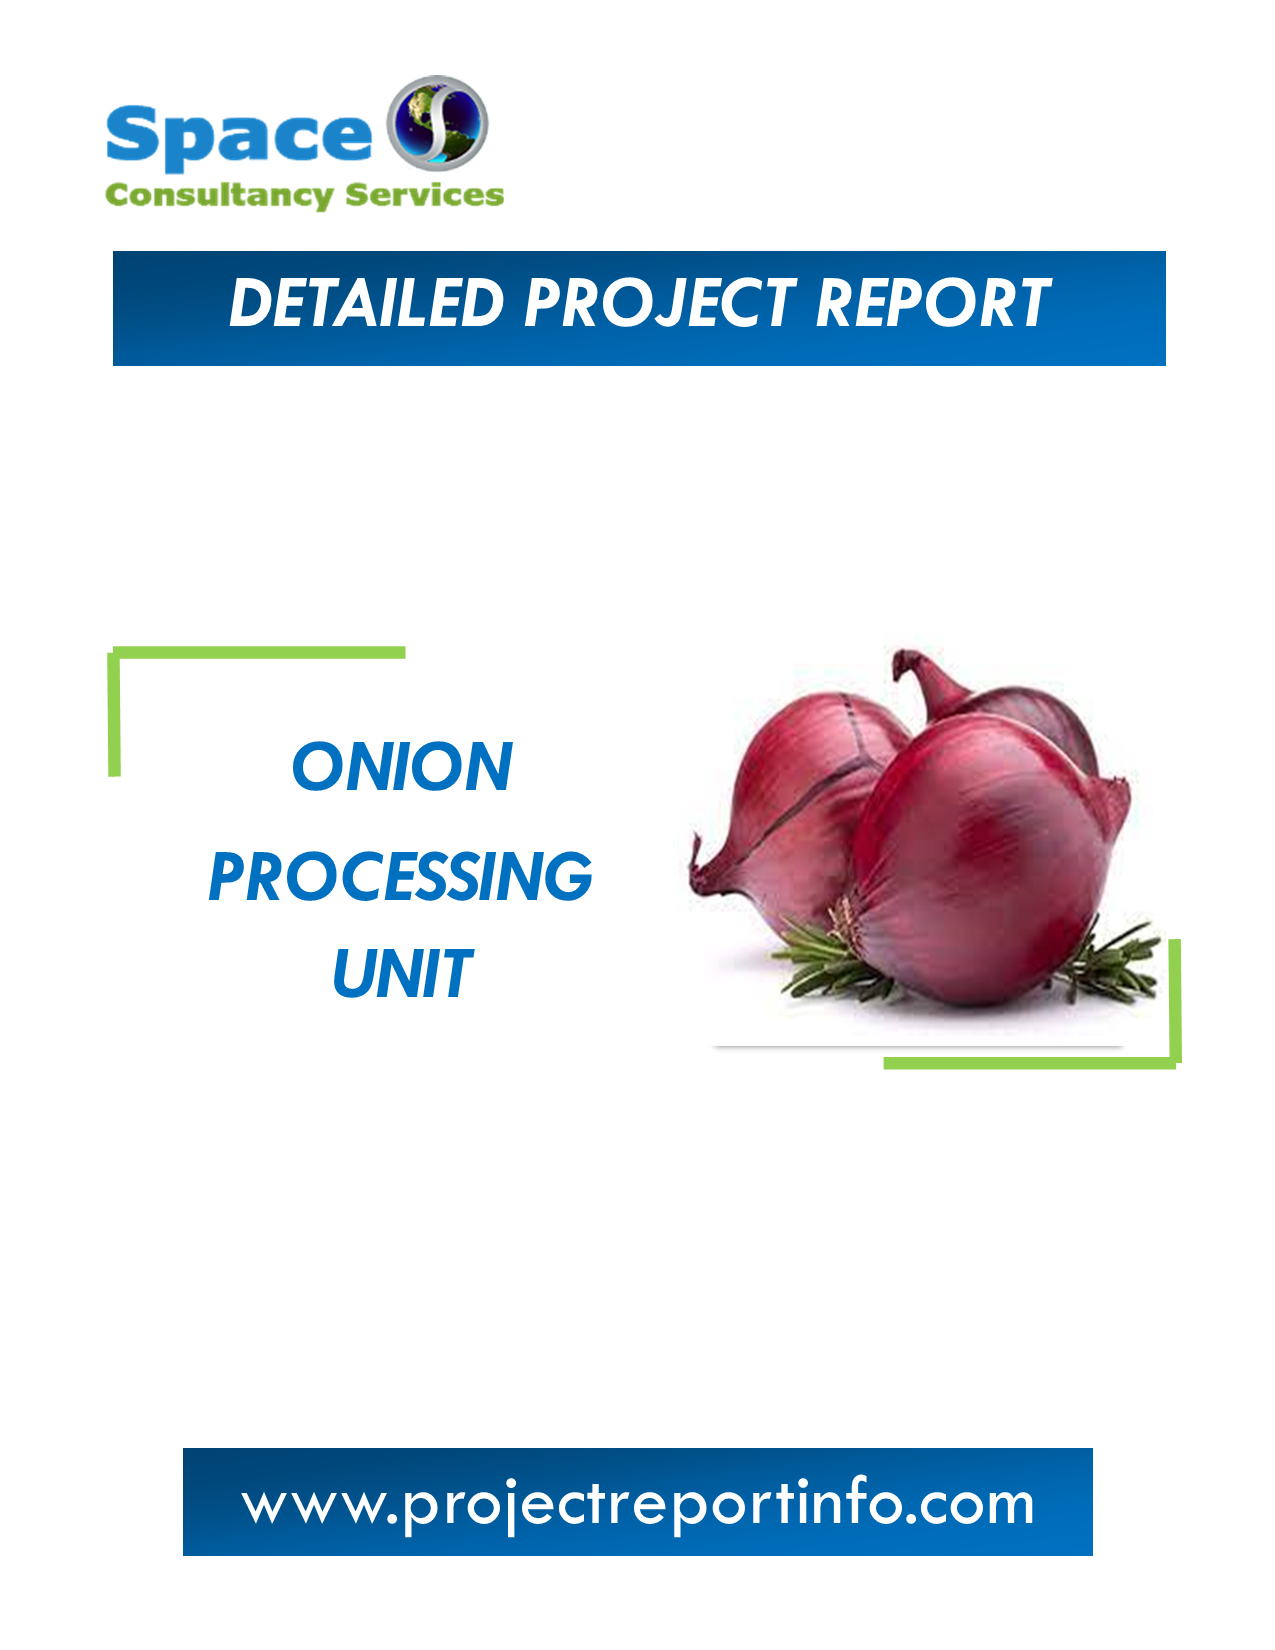 Project Report on Onion Processing Unit